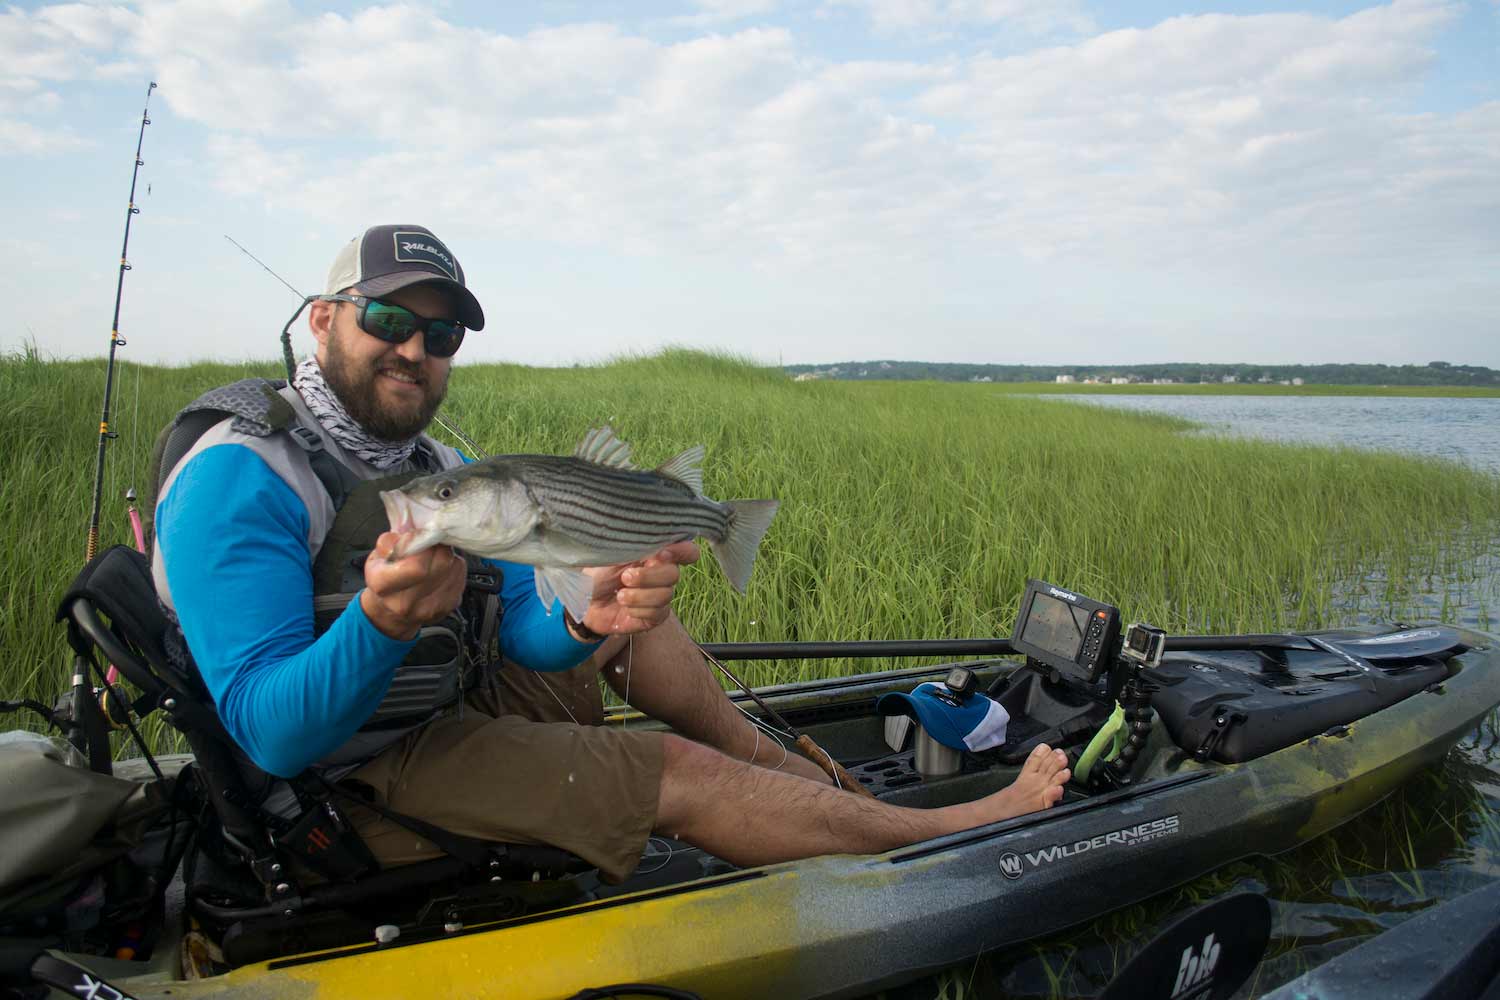 Build Out Your Saltwater Fishing Kayak Like the Ultimate Lightweight Skiff